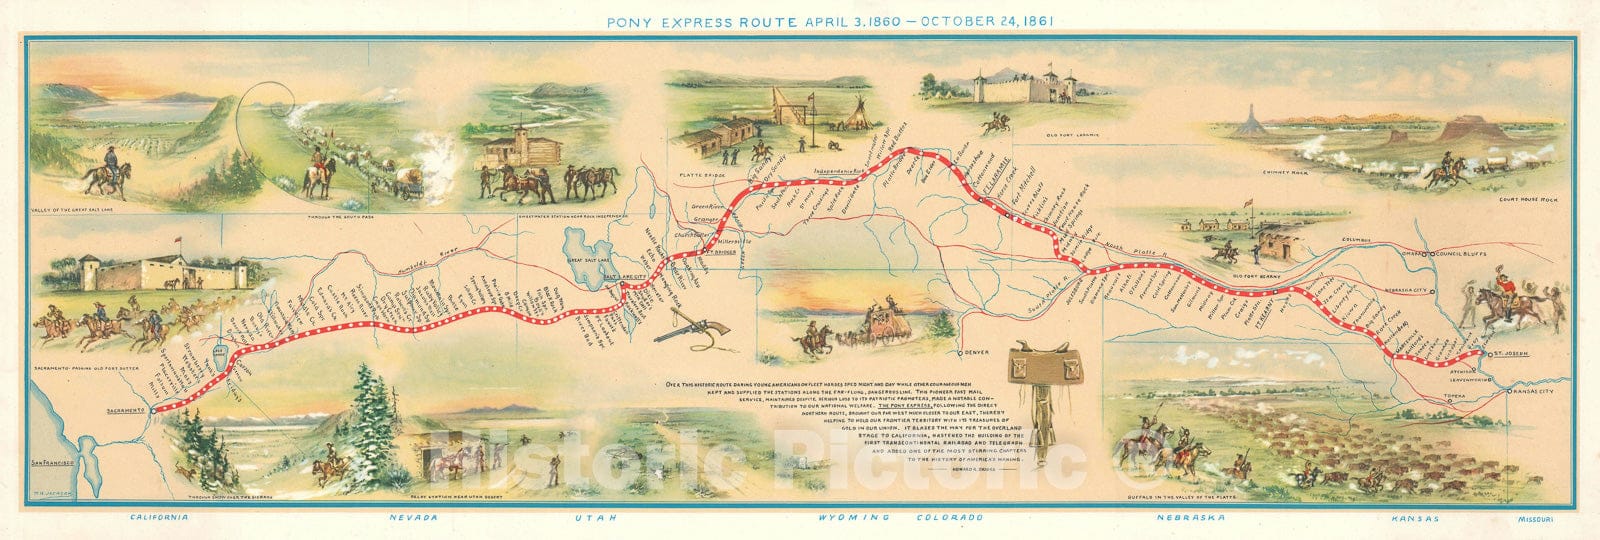 Historic Map : Jackson Pictorial Map of The Pony Express Route, 1951, Vintage Wall Art